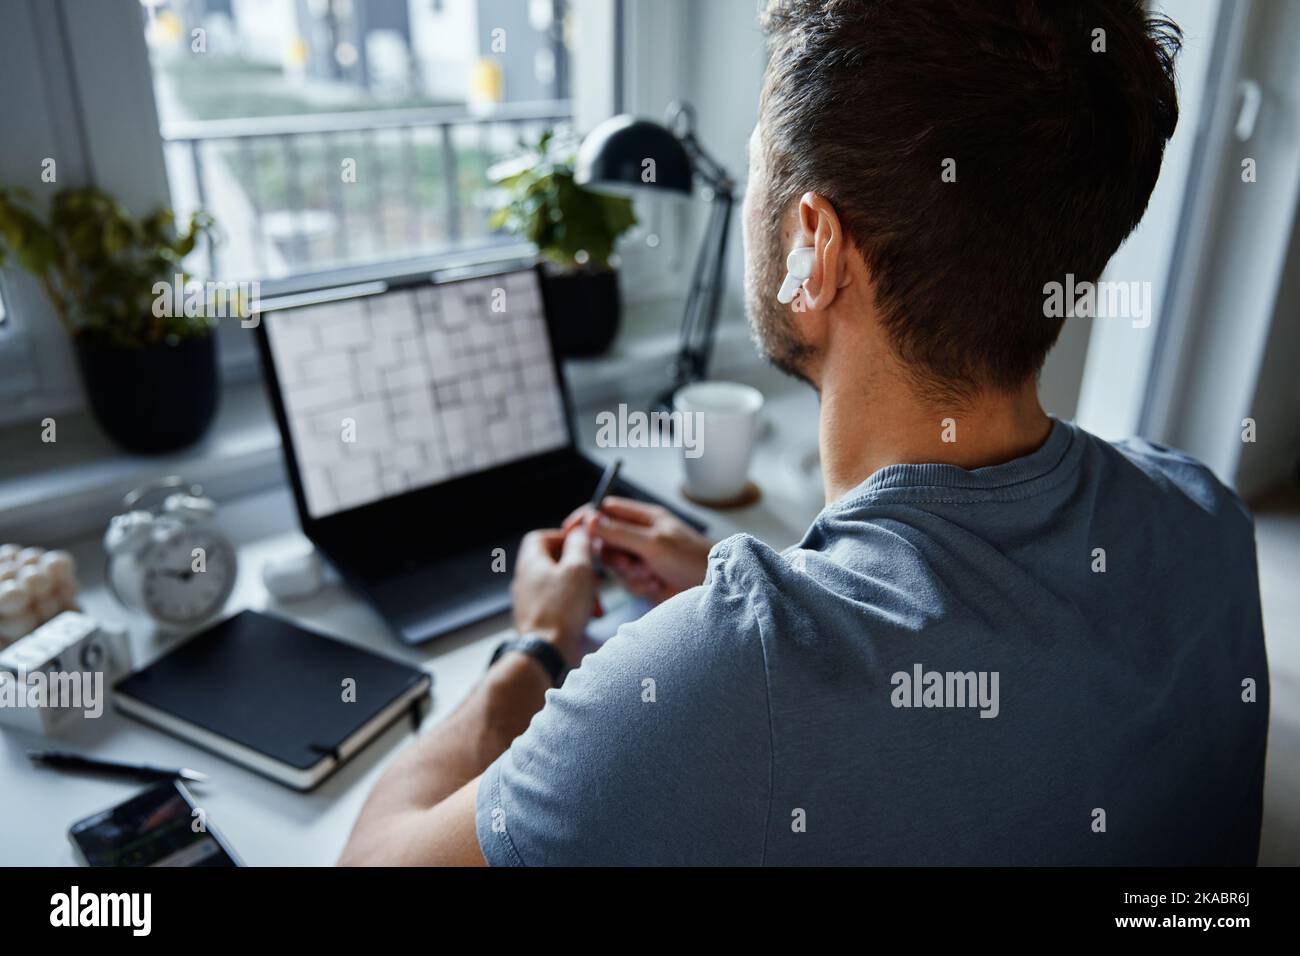 Home office workplace with laptop. Man working remotely from home, using laptop. Male freelancer sitting at table near window Stock Photo